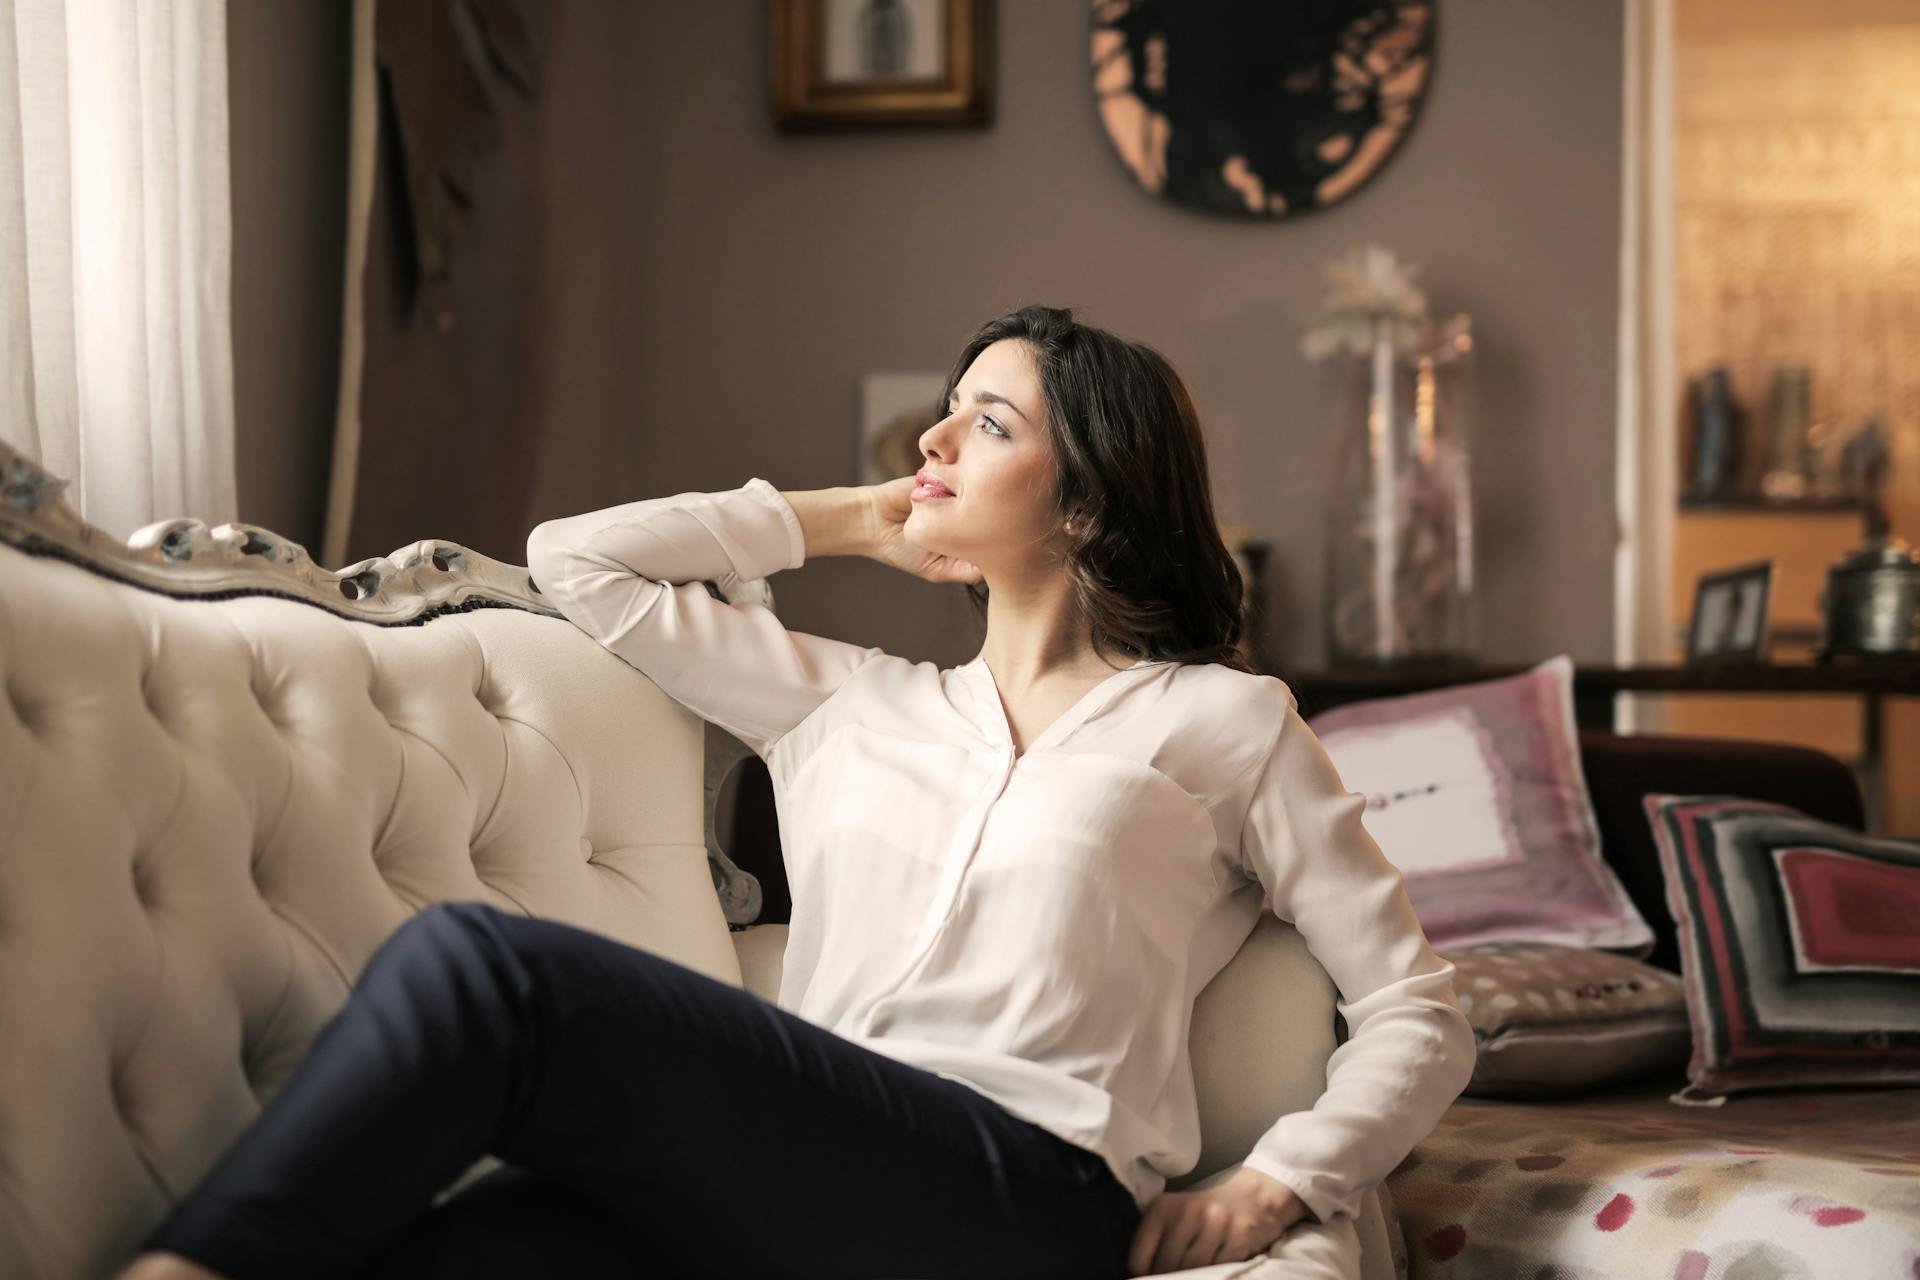 A woman sitting on a sofa | Source: Pexels